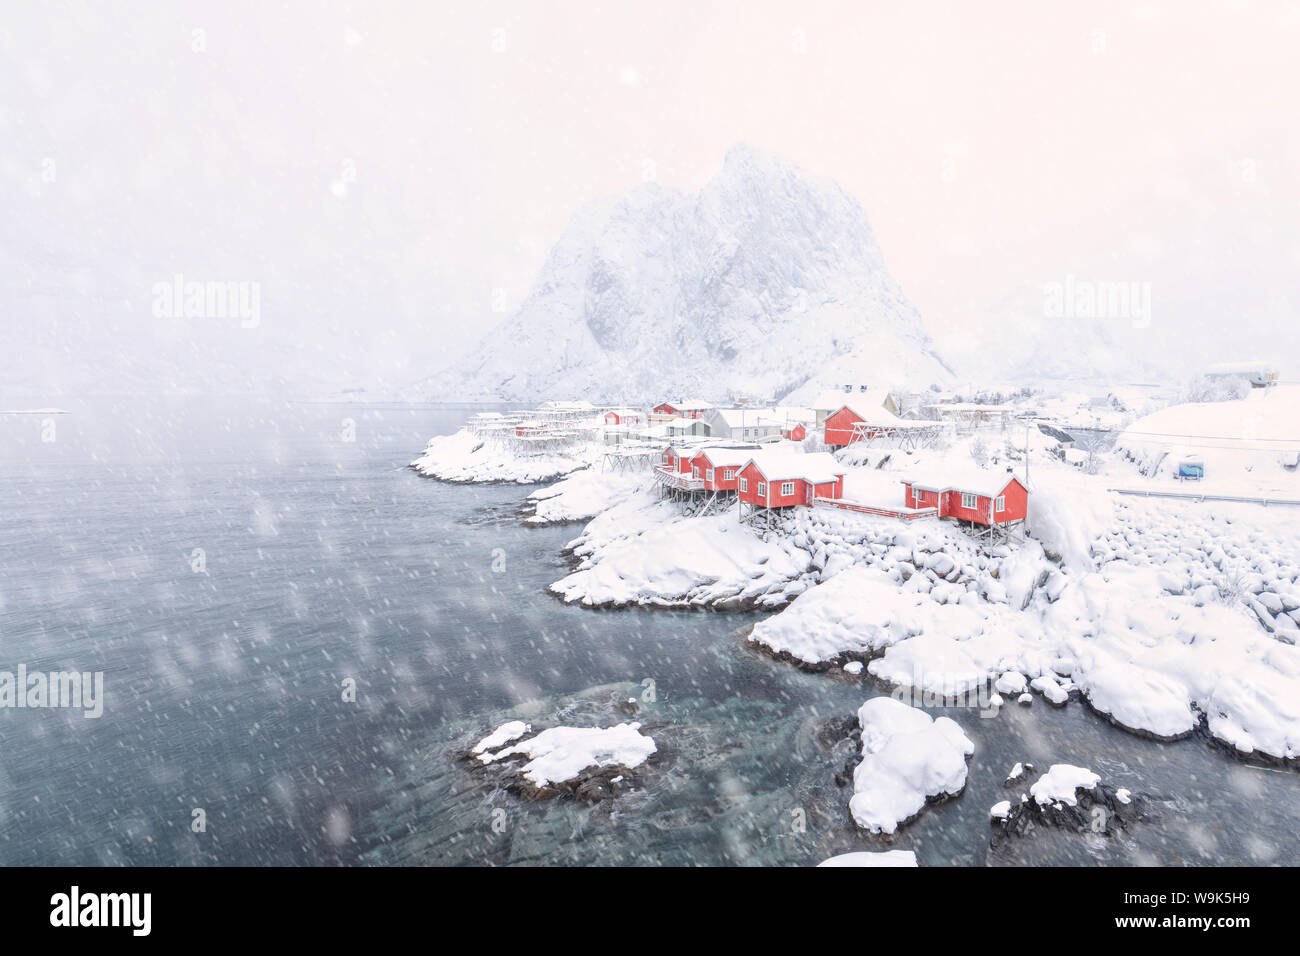 Heavy snowfall on the fishermen's houses called Rorbu surrounded by the frozen sea, Hamnoy, Lofoten Islands, Arctic, Norway, Scandinavia, Europe Stock Photo